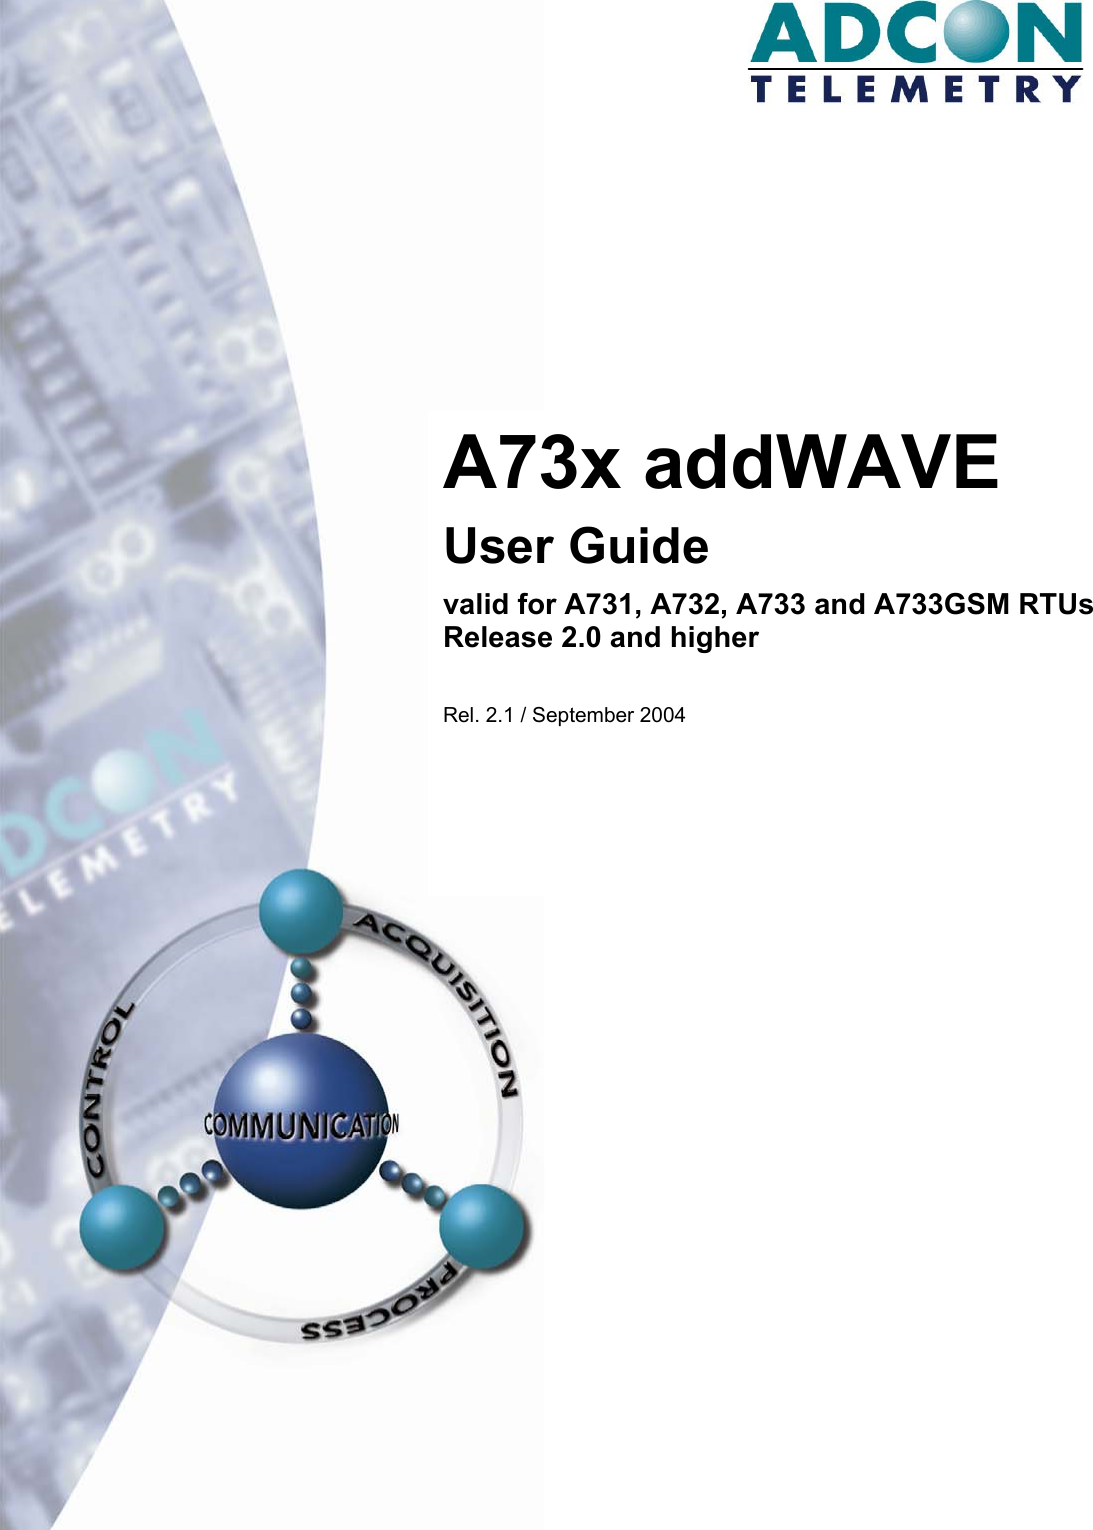         A73x addWAVE User Guide valid for A731, A732, A733 and A733GSM RTUs  Release 2.0 and higher  Rel. 2.1 / September 2004 